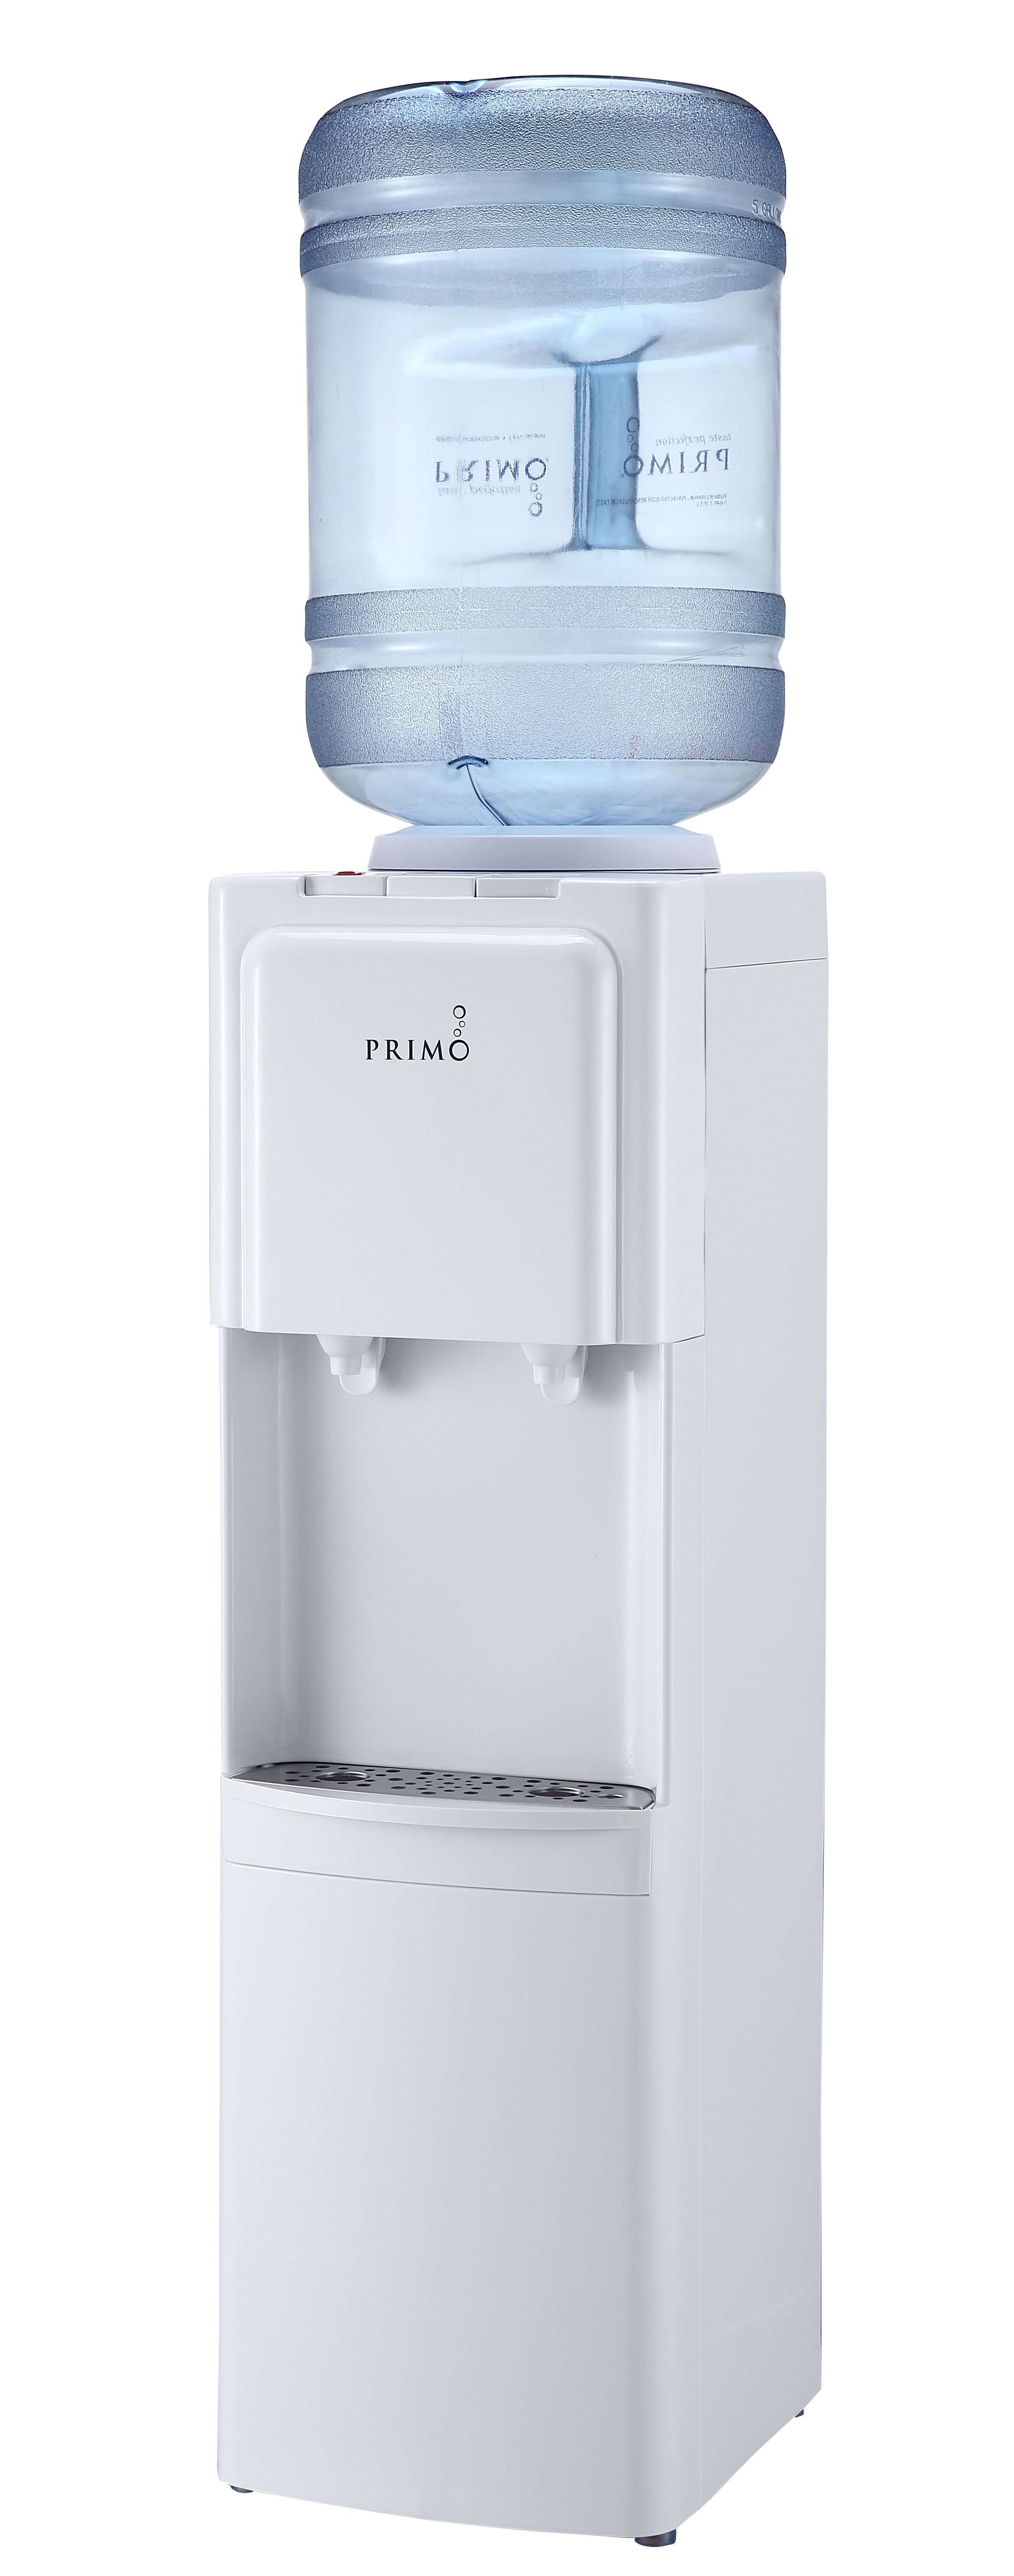 Primo® Water Dispenser Top Loading 36" Height, Hot and Cold Temperature, White 3 or 5 Gallon - image 5 of 10